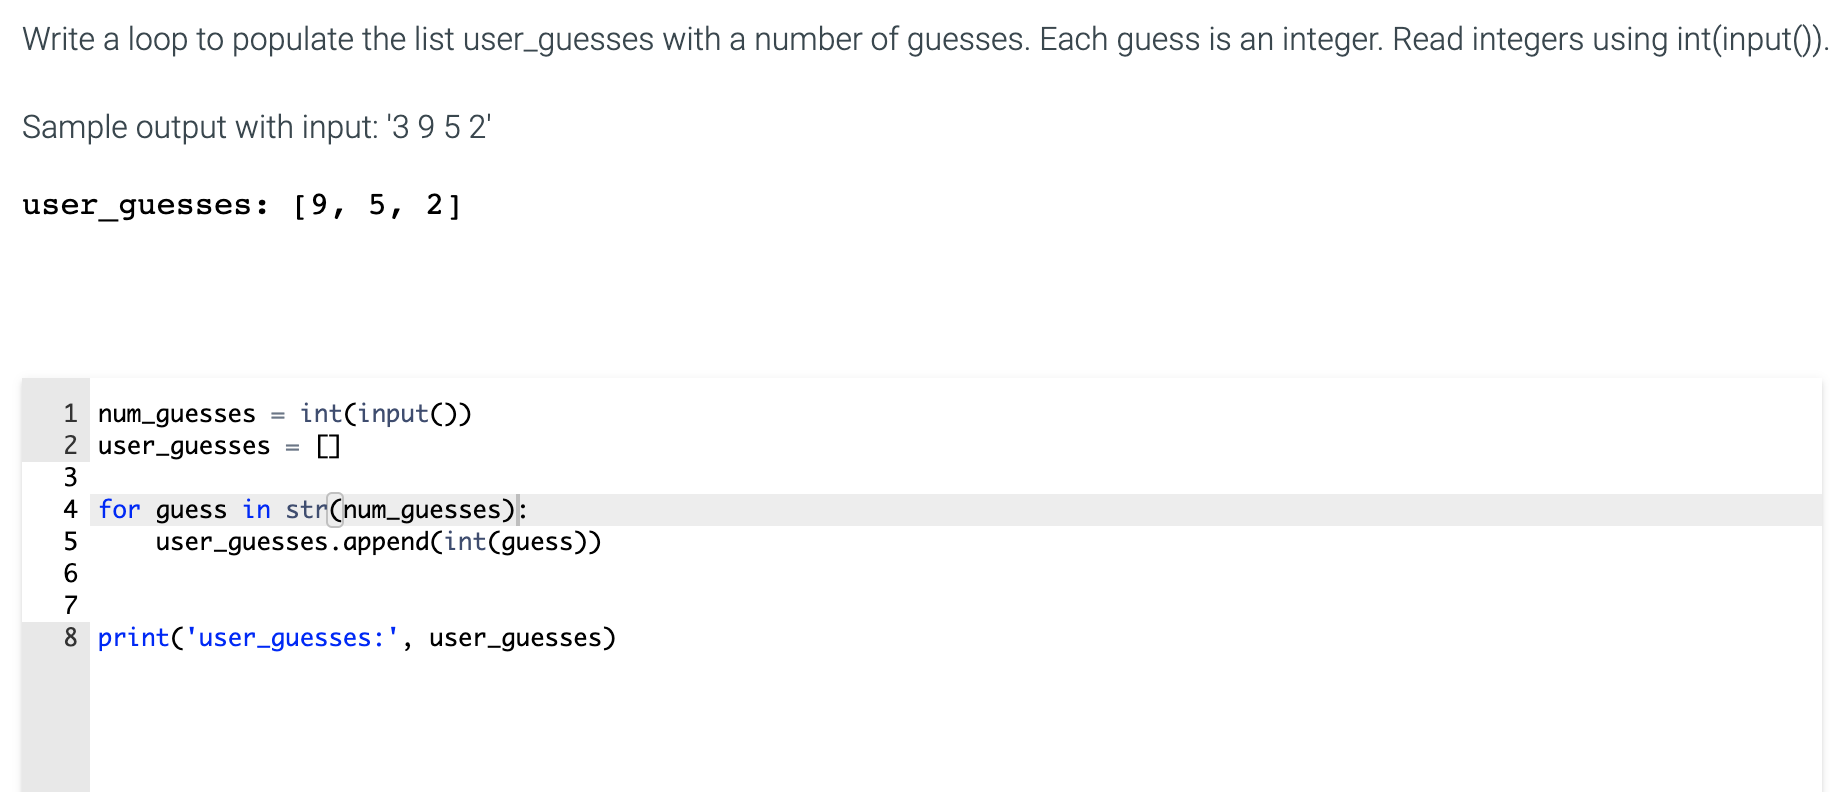 Write a loop to populate the list user_guesses with a number of guesses. Each guess is an integer. Read integers using int(input().
Sample output with input: '3 9 5 2'
user_guesses: [9, 5, 2]
int(input())
1 num_guesses
2 user_guesses
3
4 for guess in str(num_guesses):
user_guesses.append(int(guess))
8 print('user_guesses:', user_guesses)
